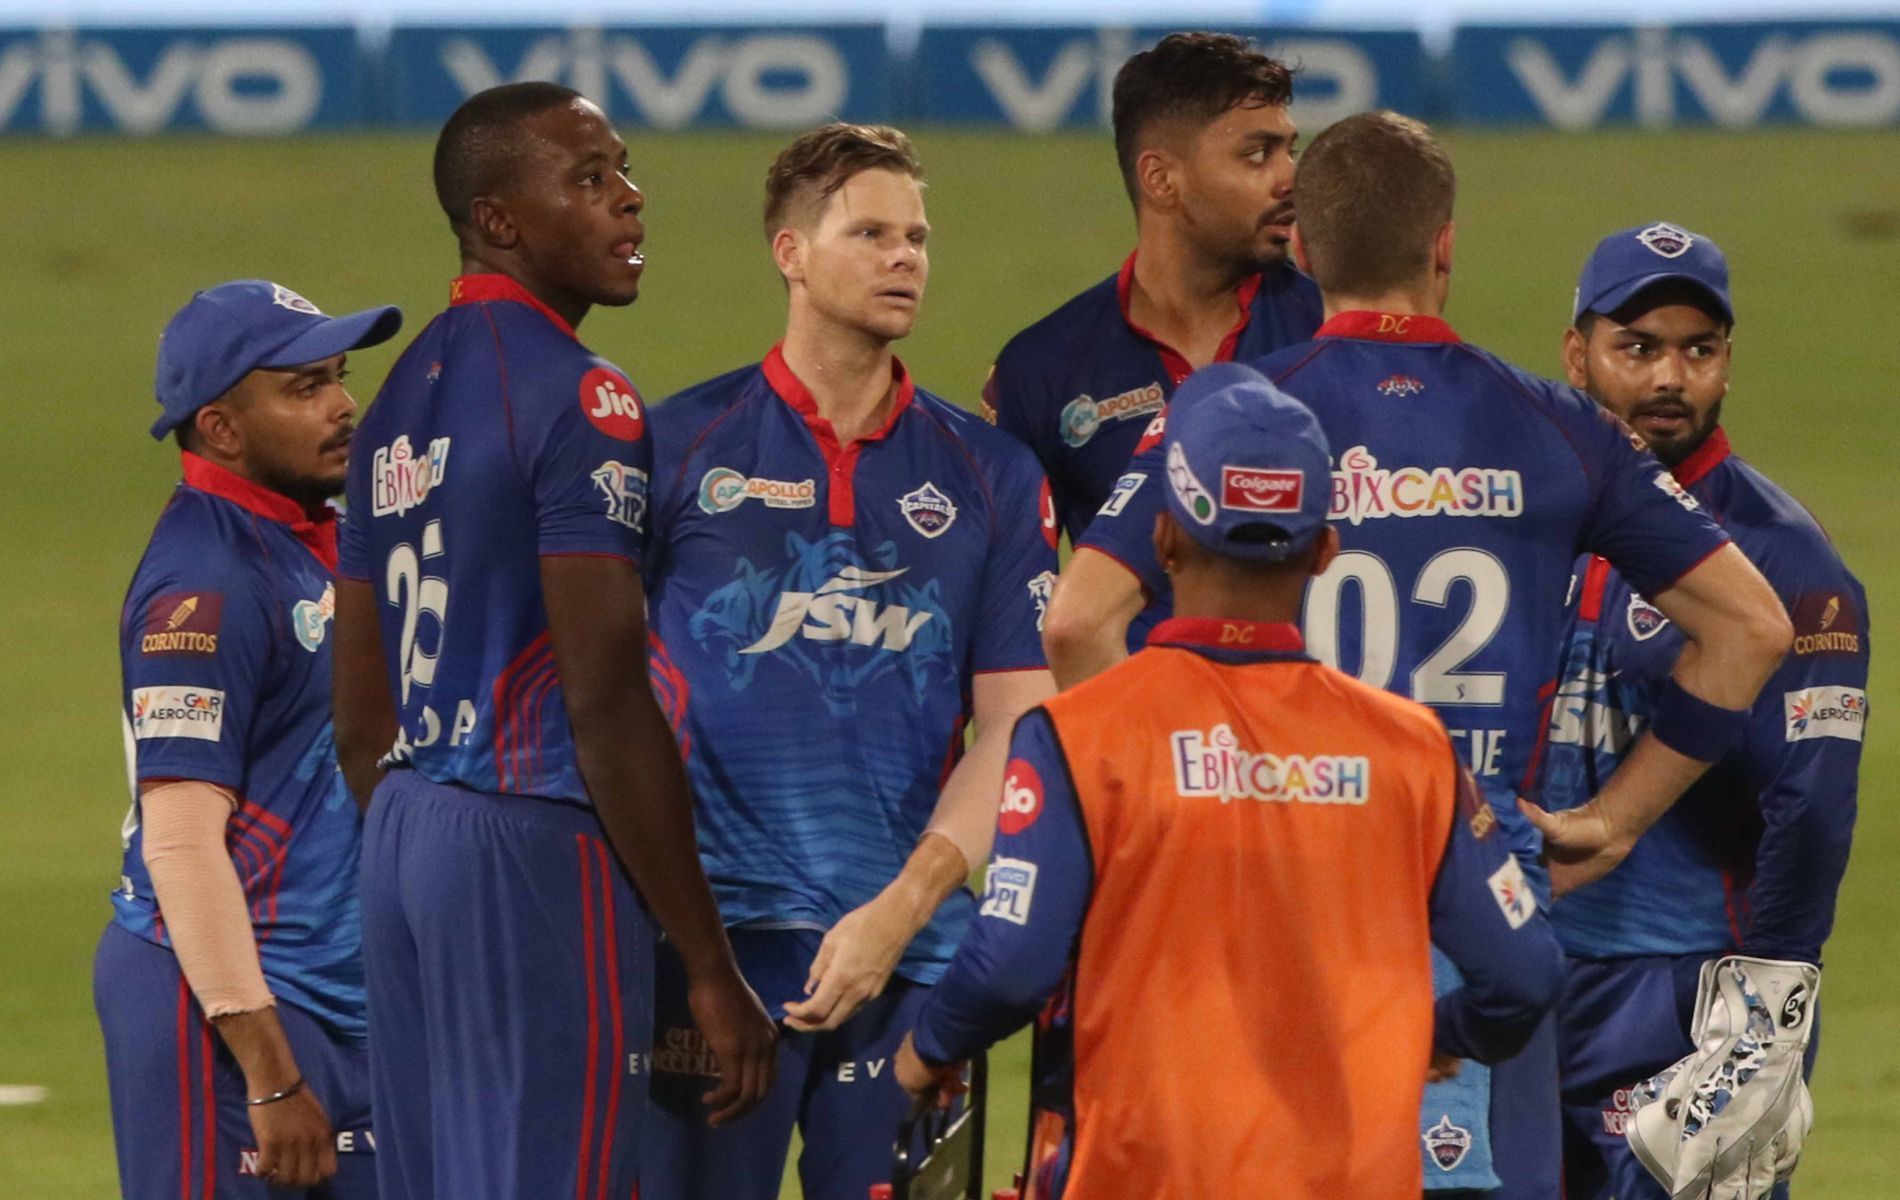 Delhi Capitals will look to focus on their two young leaders -- Rishabh Pant and Shreyas Iyer.